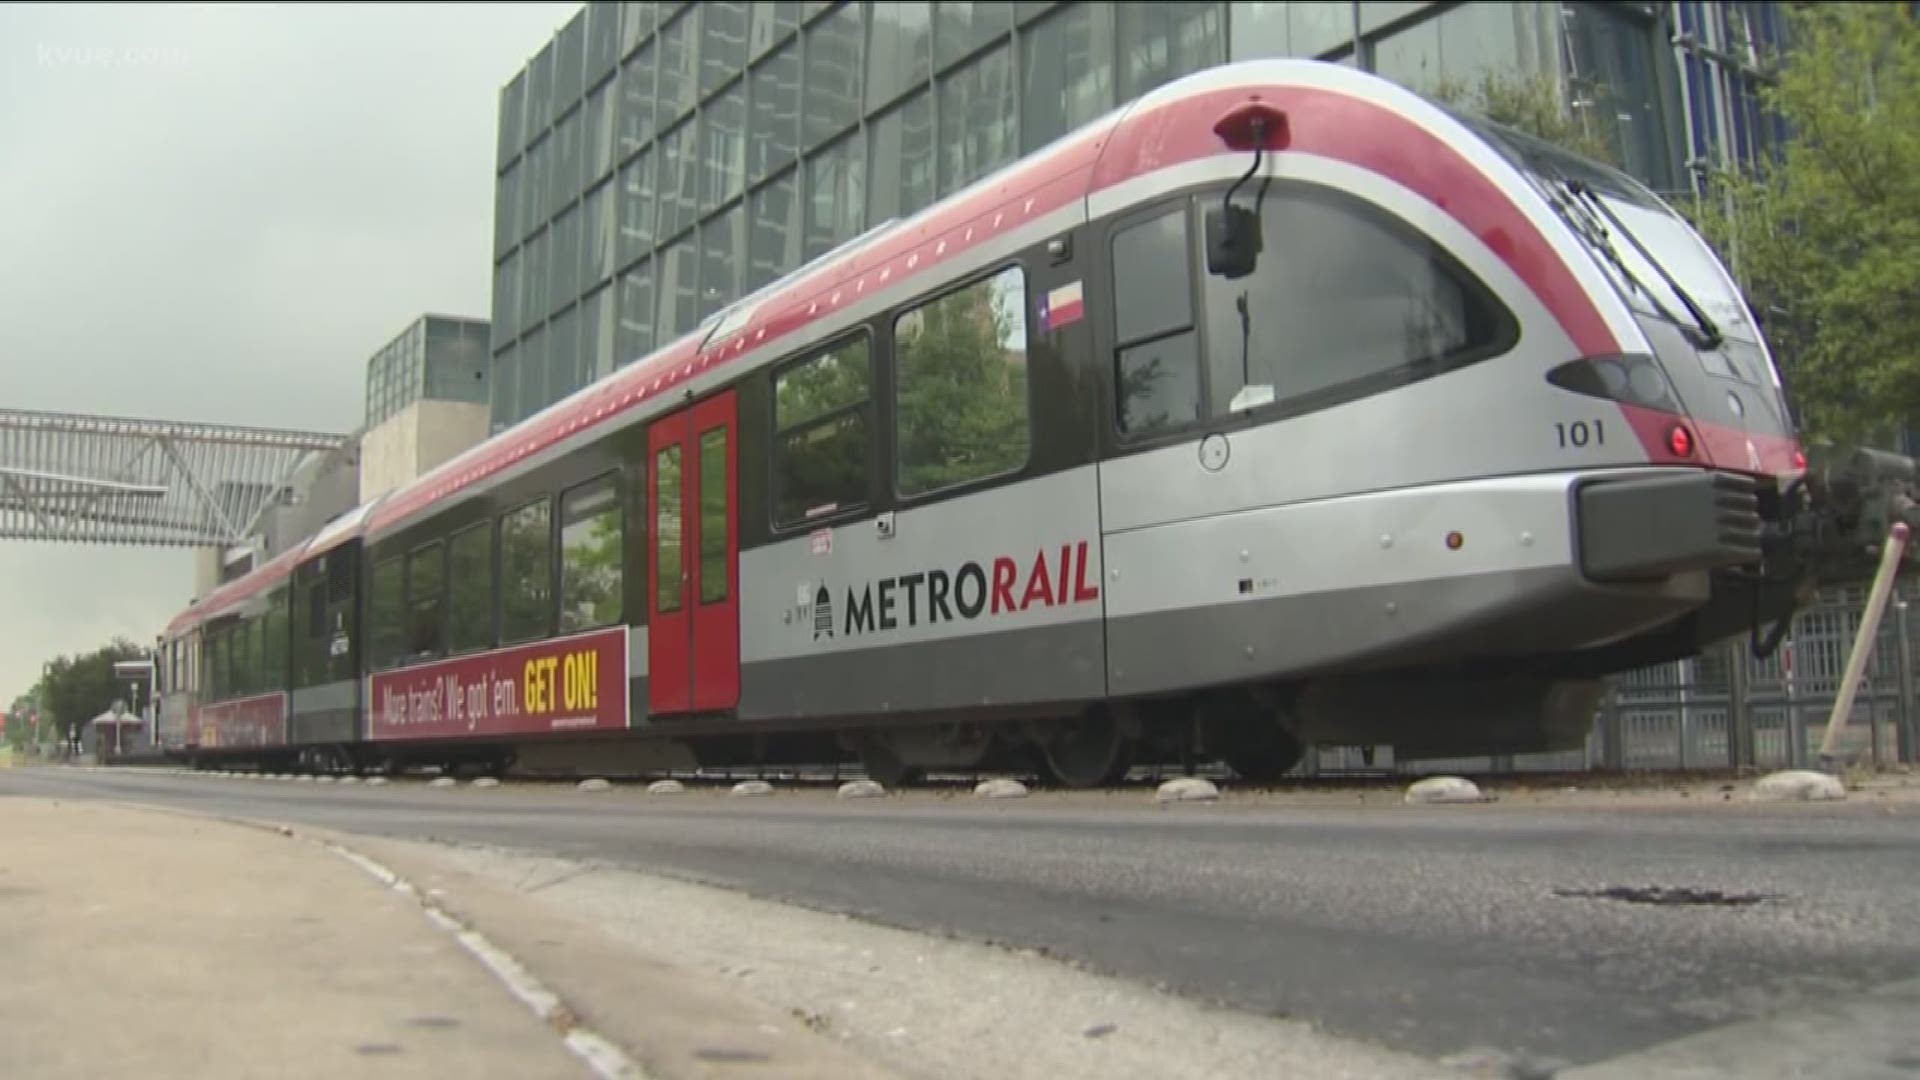 Starting next week, CapMetro is changing the Metrorail service – and it could make for a longer commute.